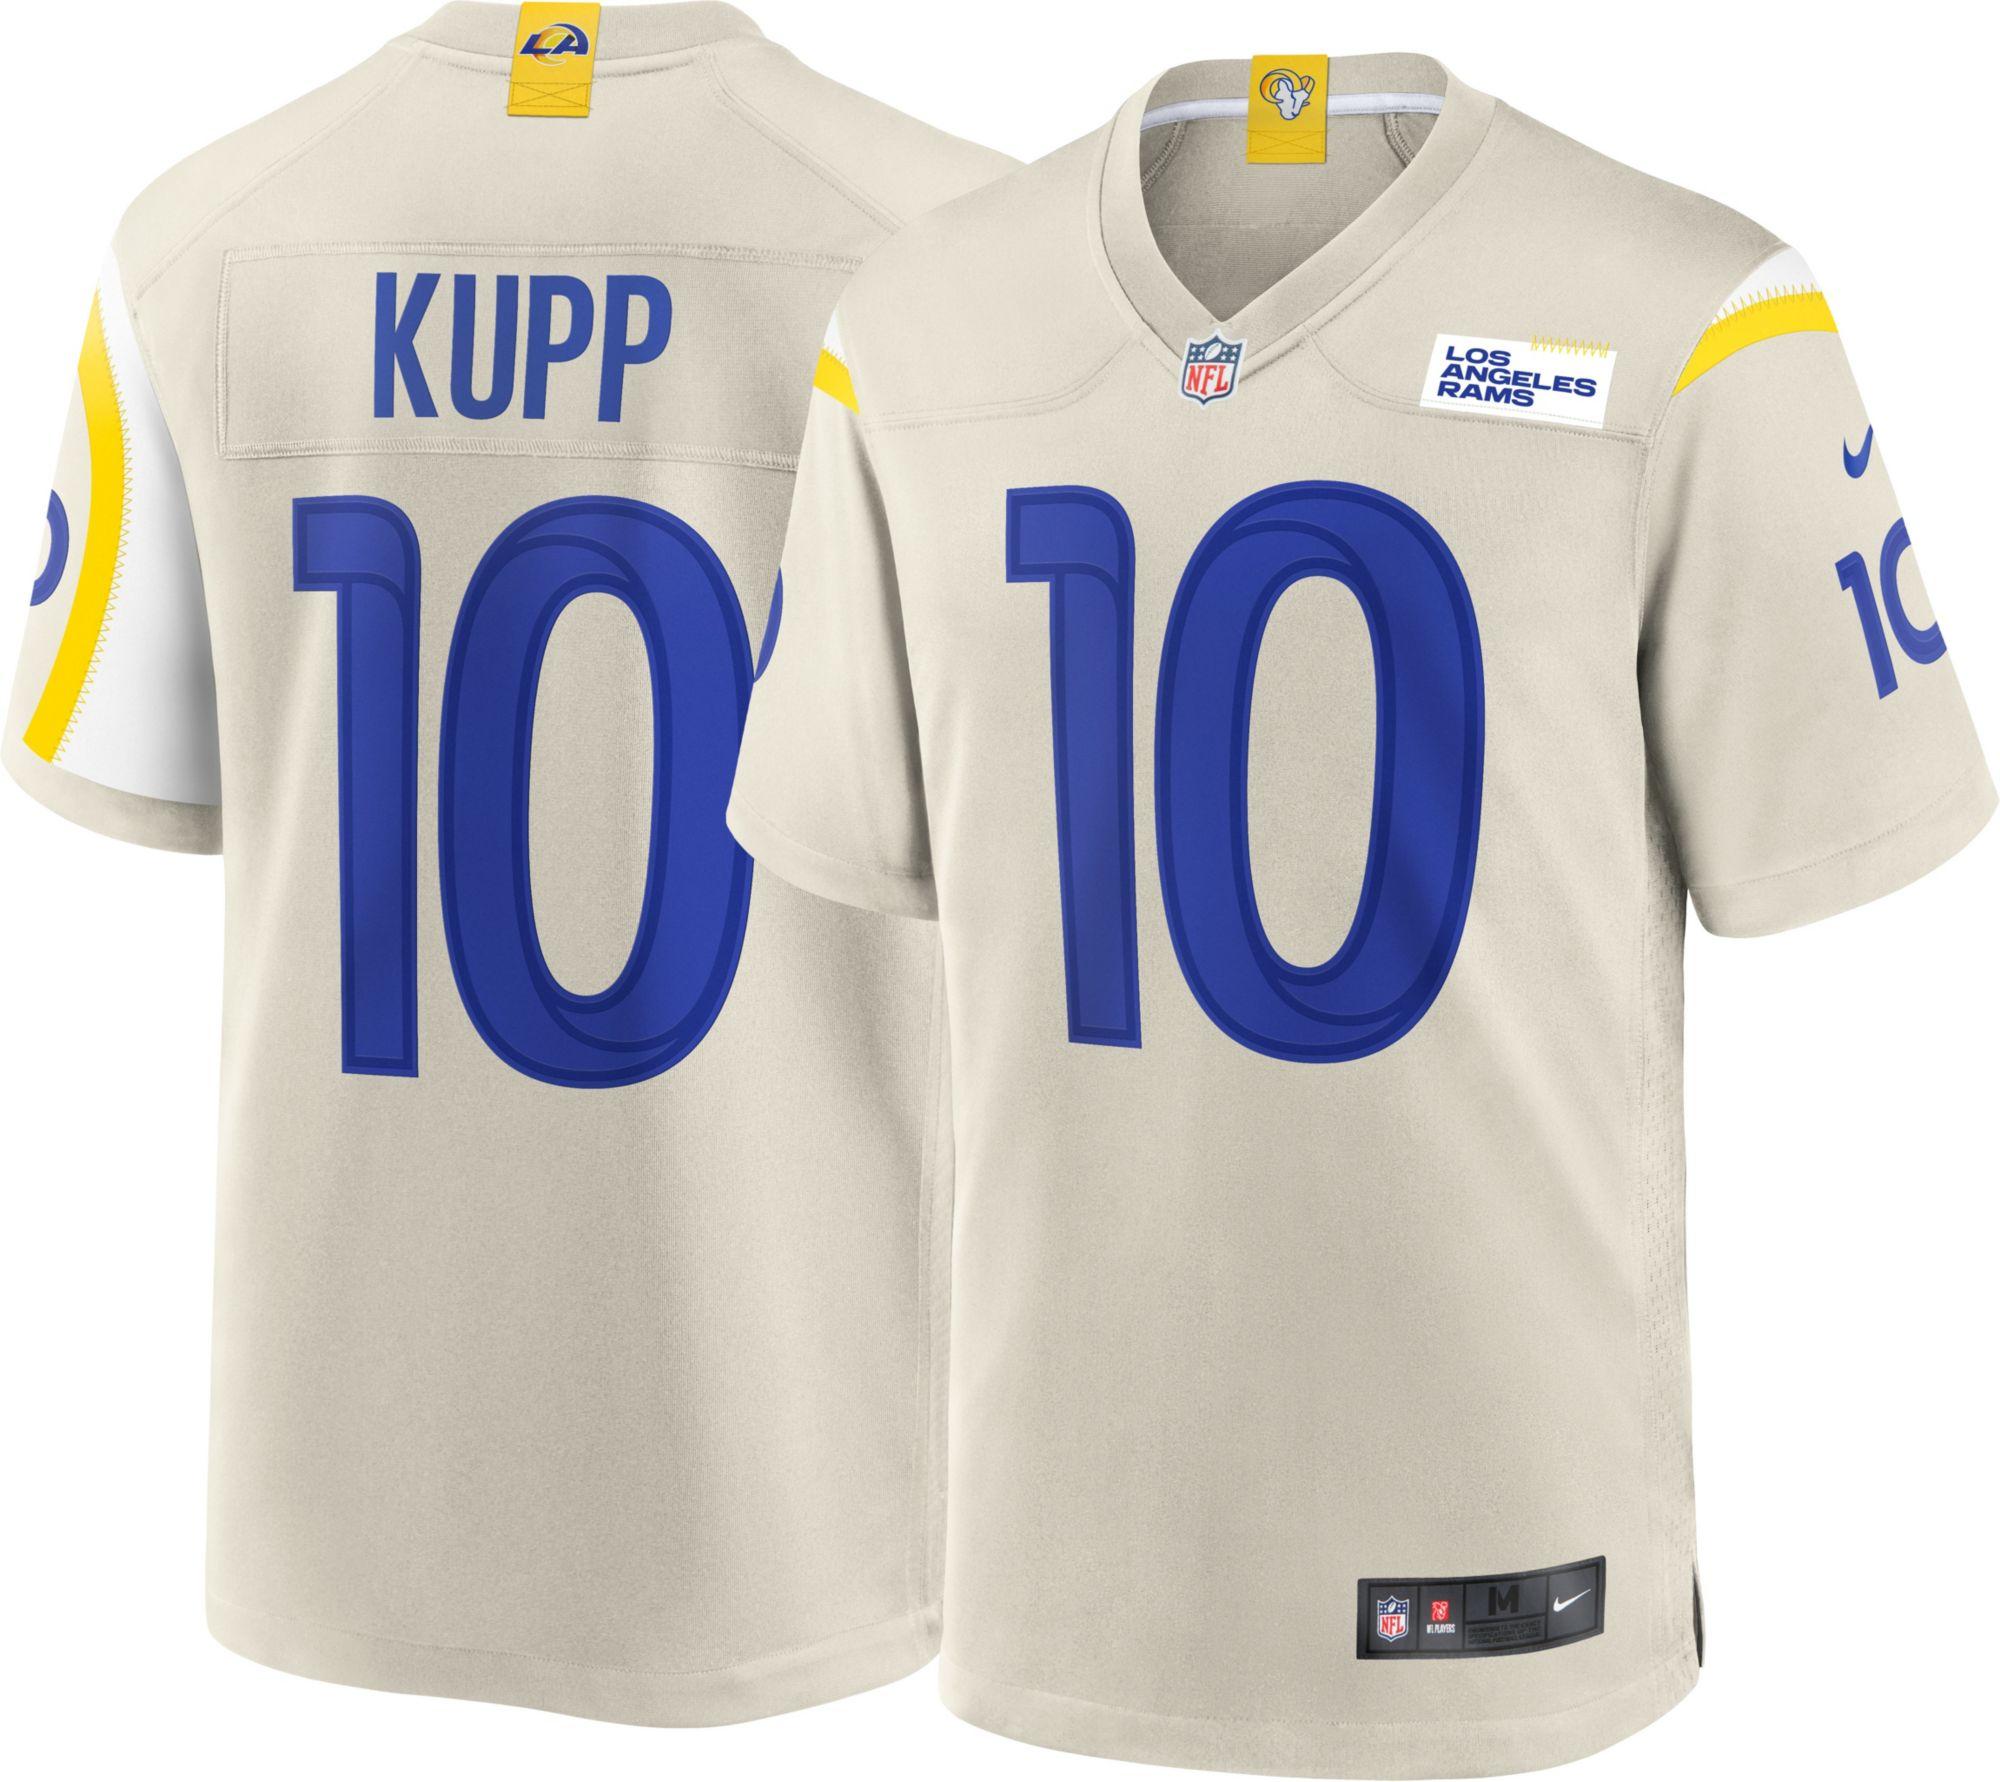 Nike Satin Los Angeles Rams Cooper Kupp #10 Home Cream Game Jersey in